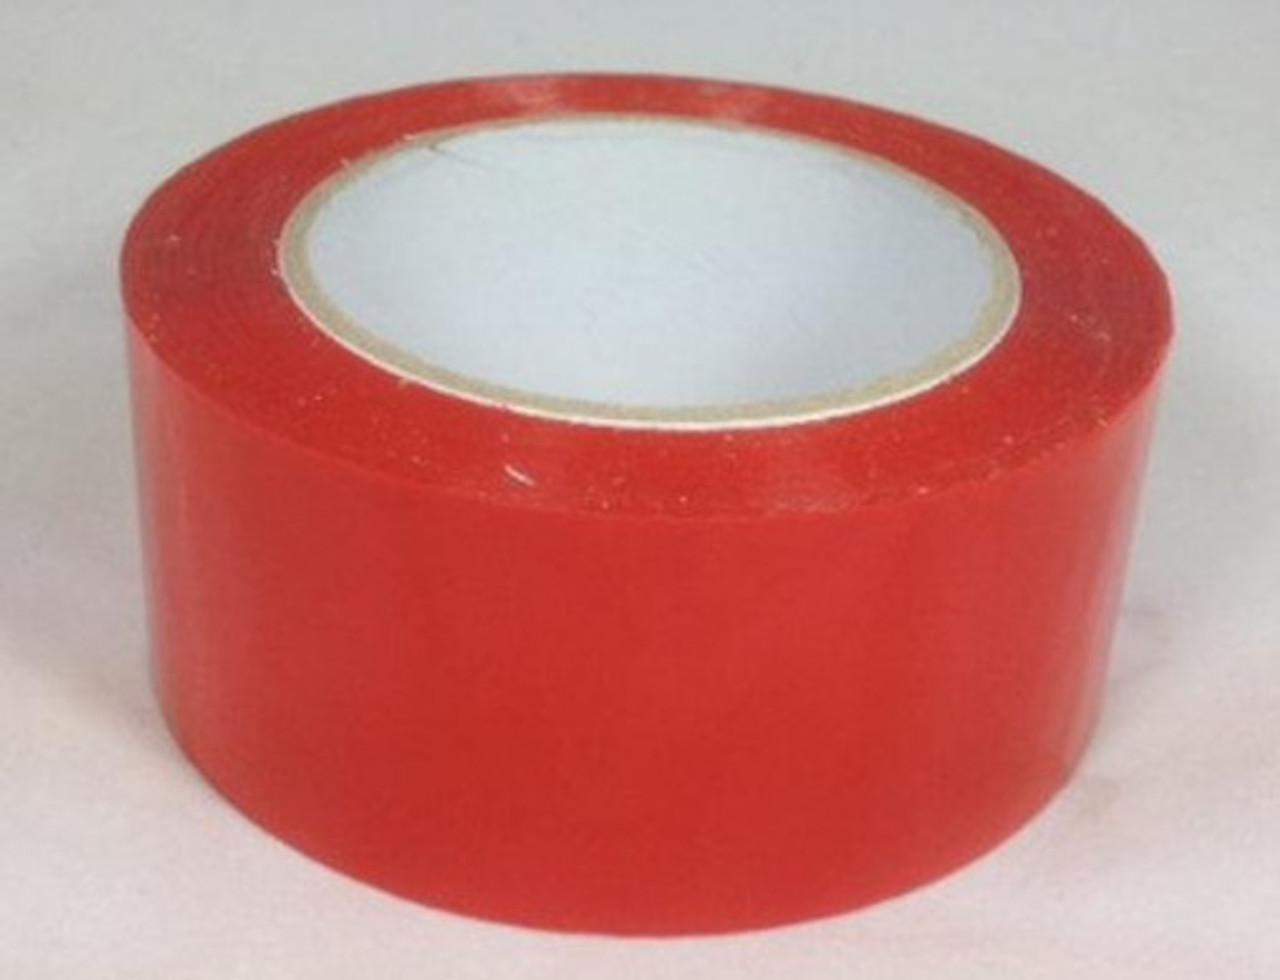 912 Rolls Red Color Carton Box Sealing Packaging Packing Tape 2 Mil Thick 3 inch x 55 Yards, Size: 3 x 55